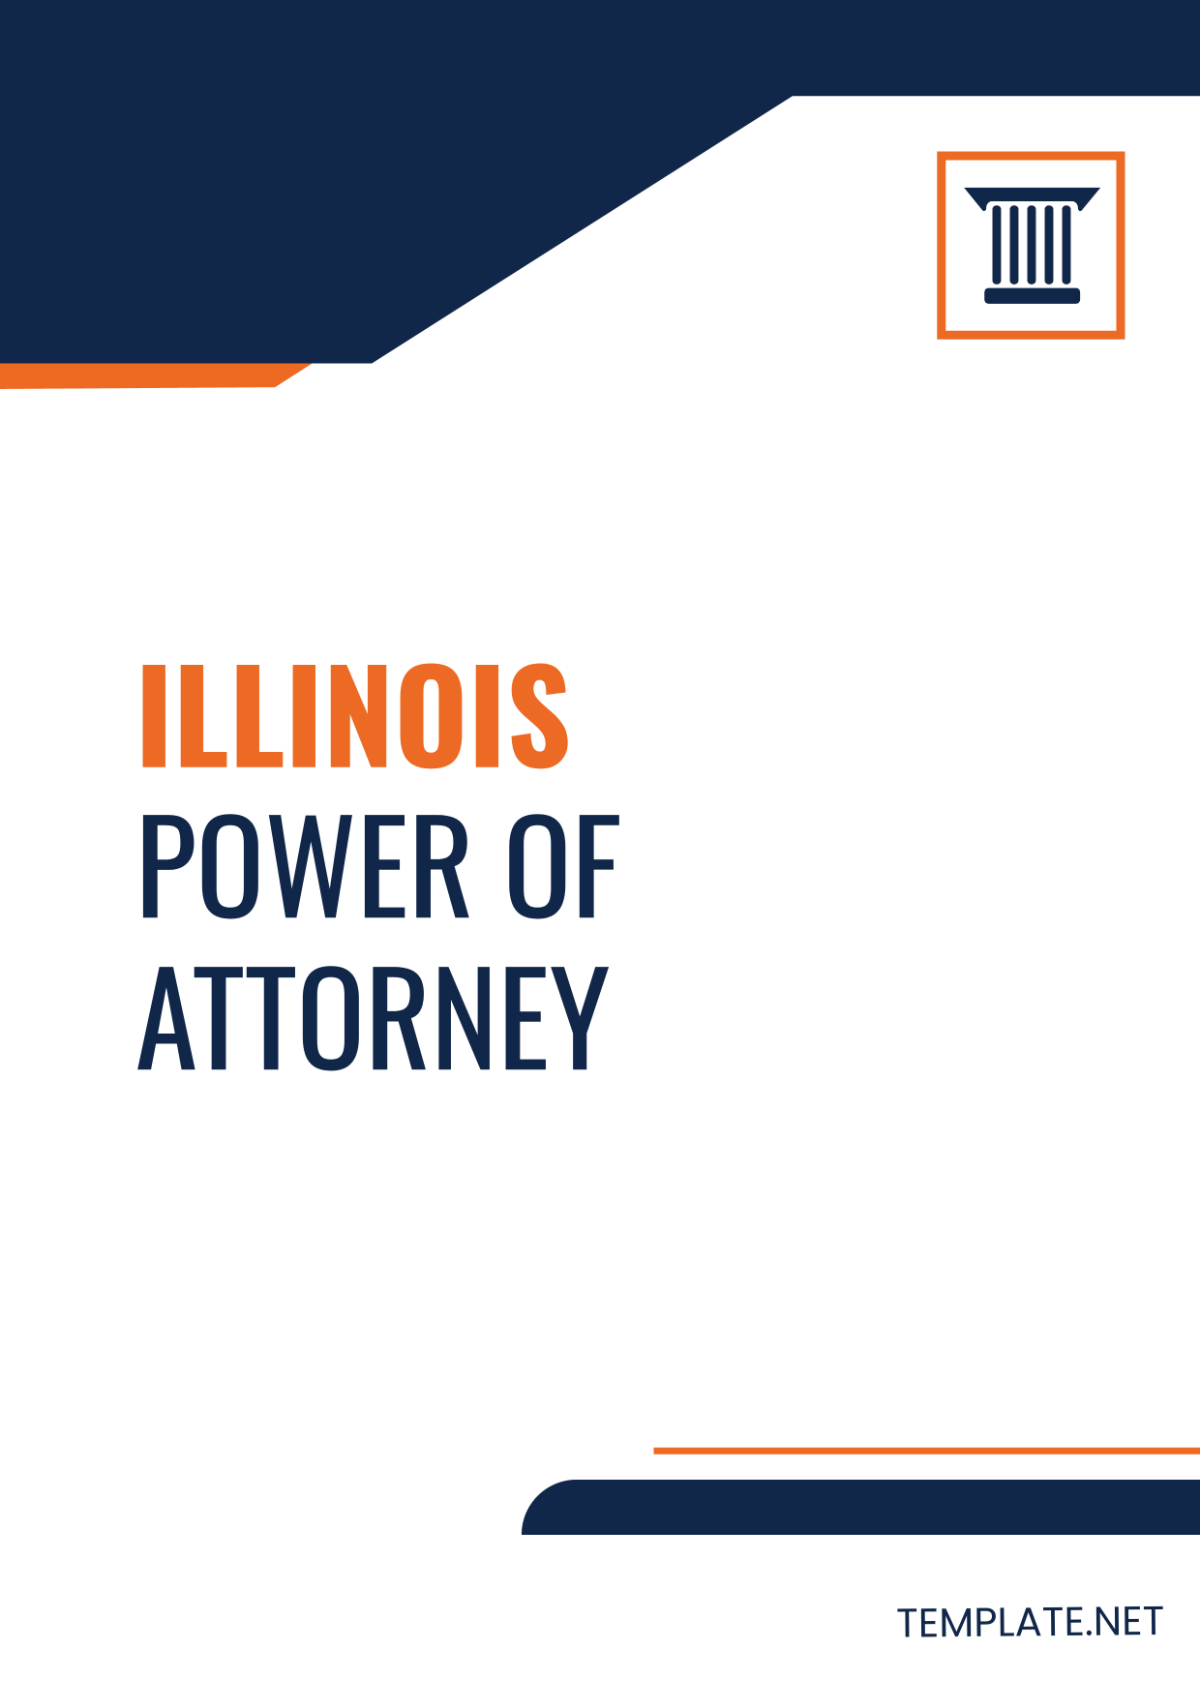 Illinois Power of Attorney Template